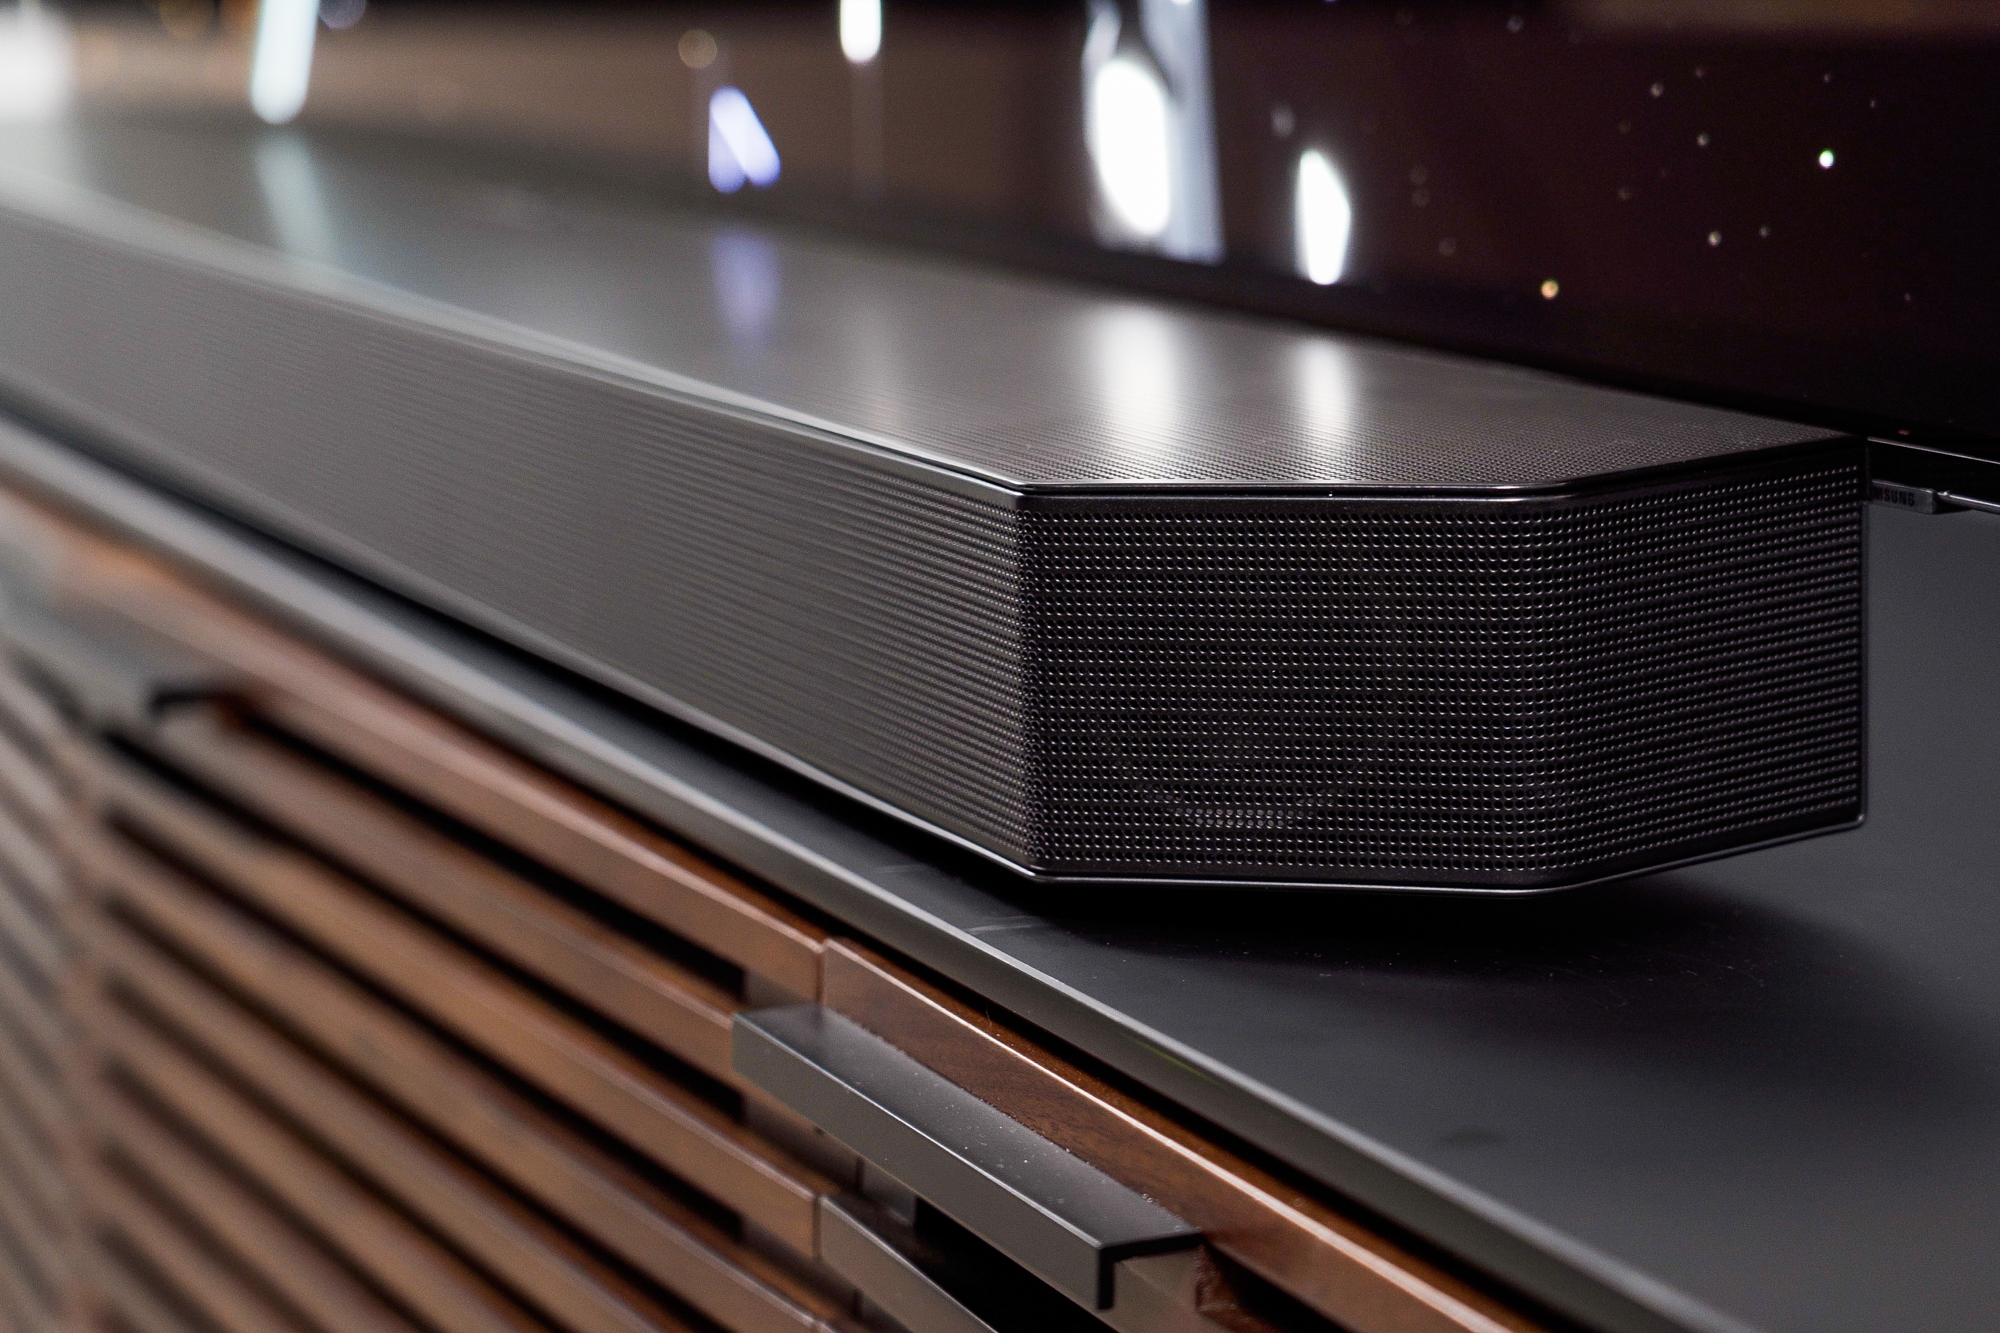 The best soundbars better sound from your TV | Digital Trends